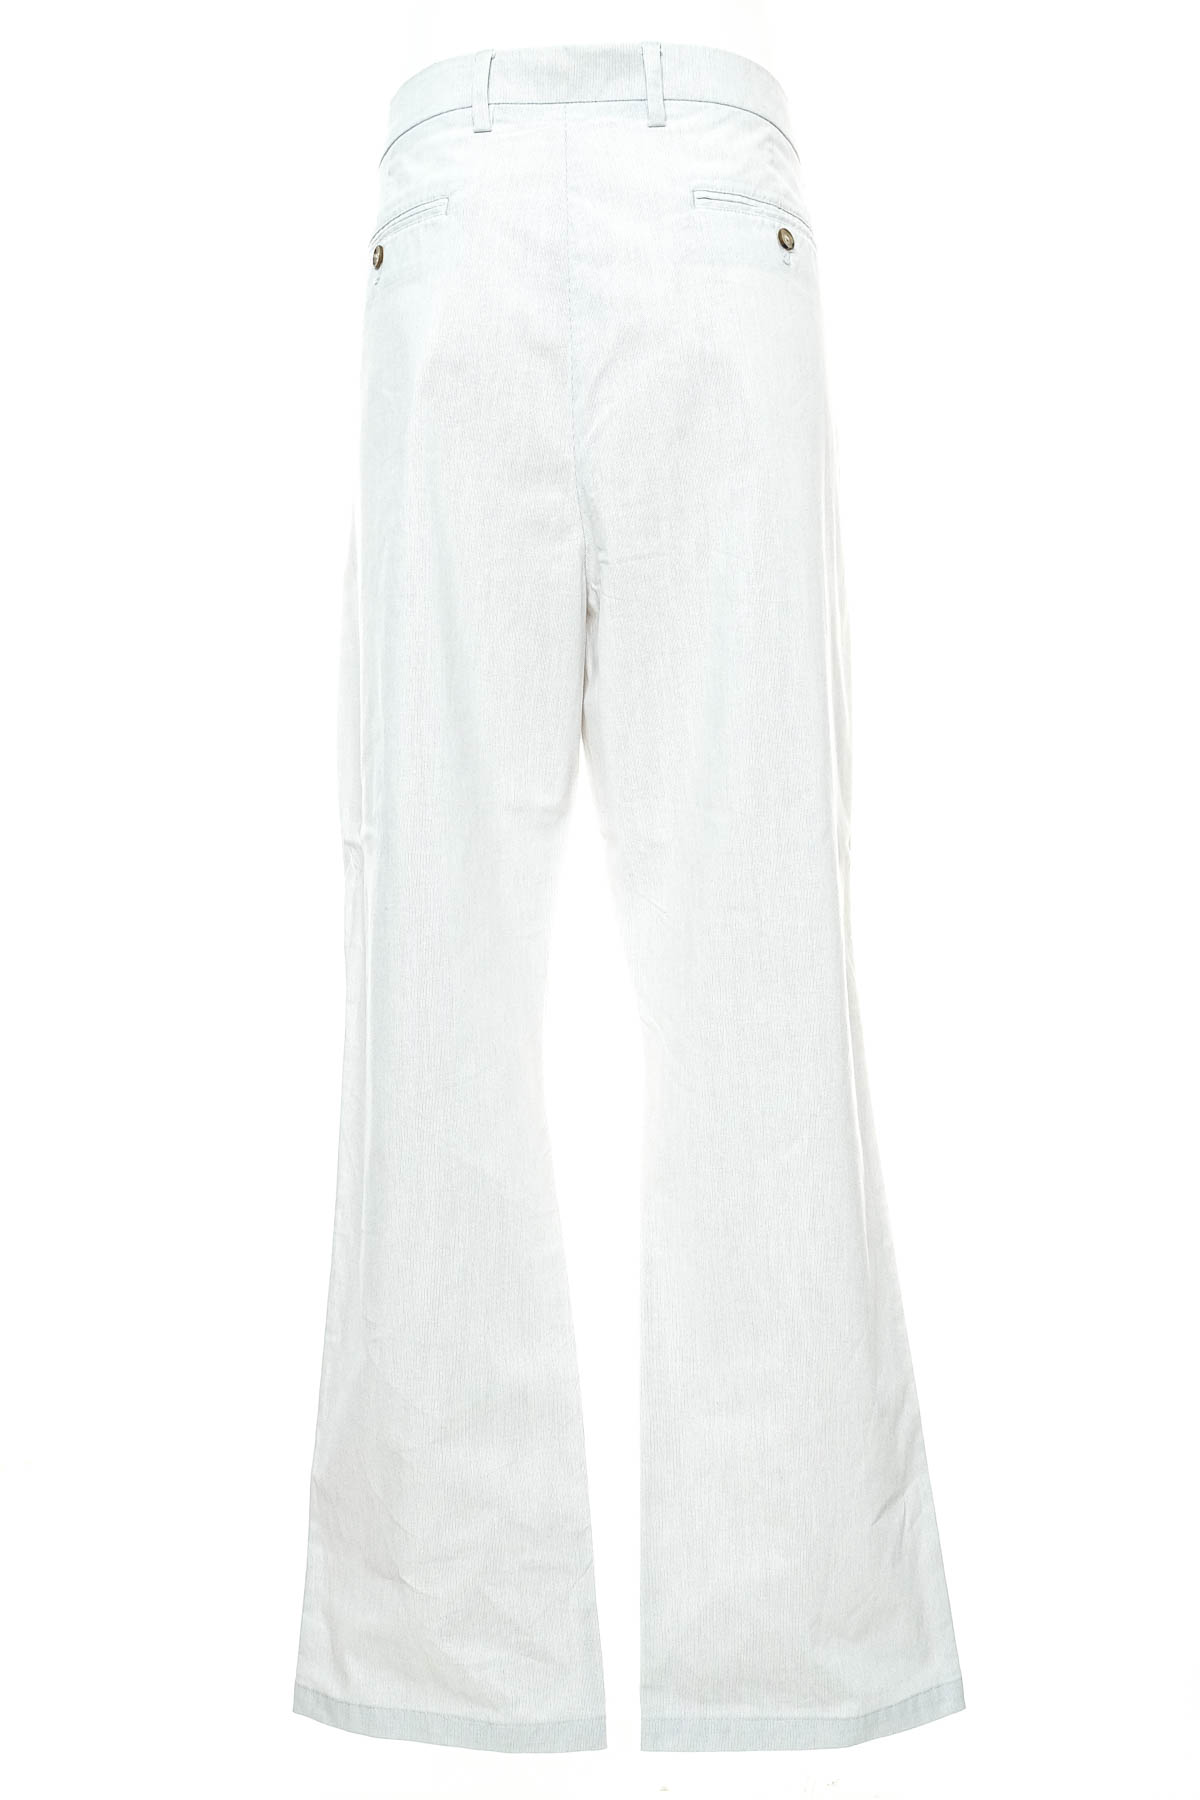 Men's trousers - OLD NAVY - 1